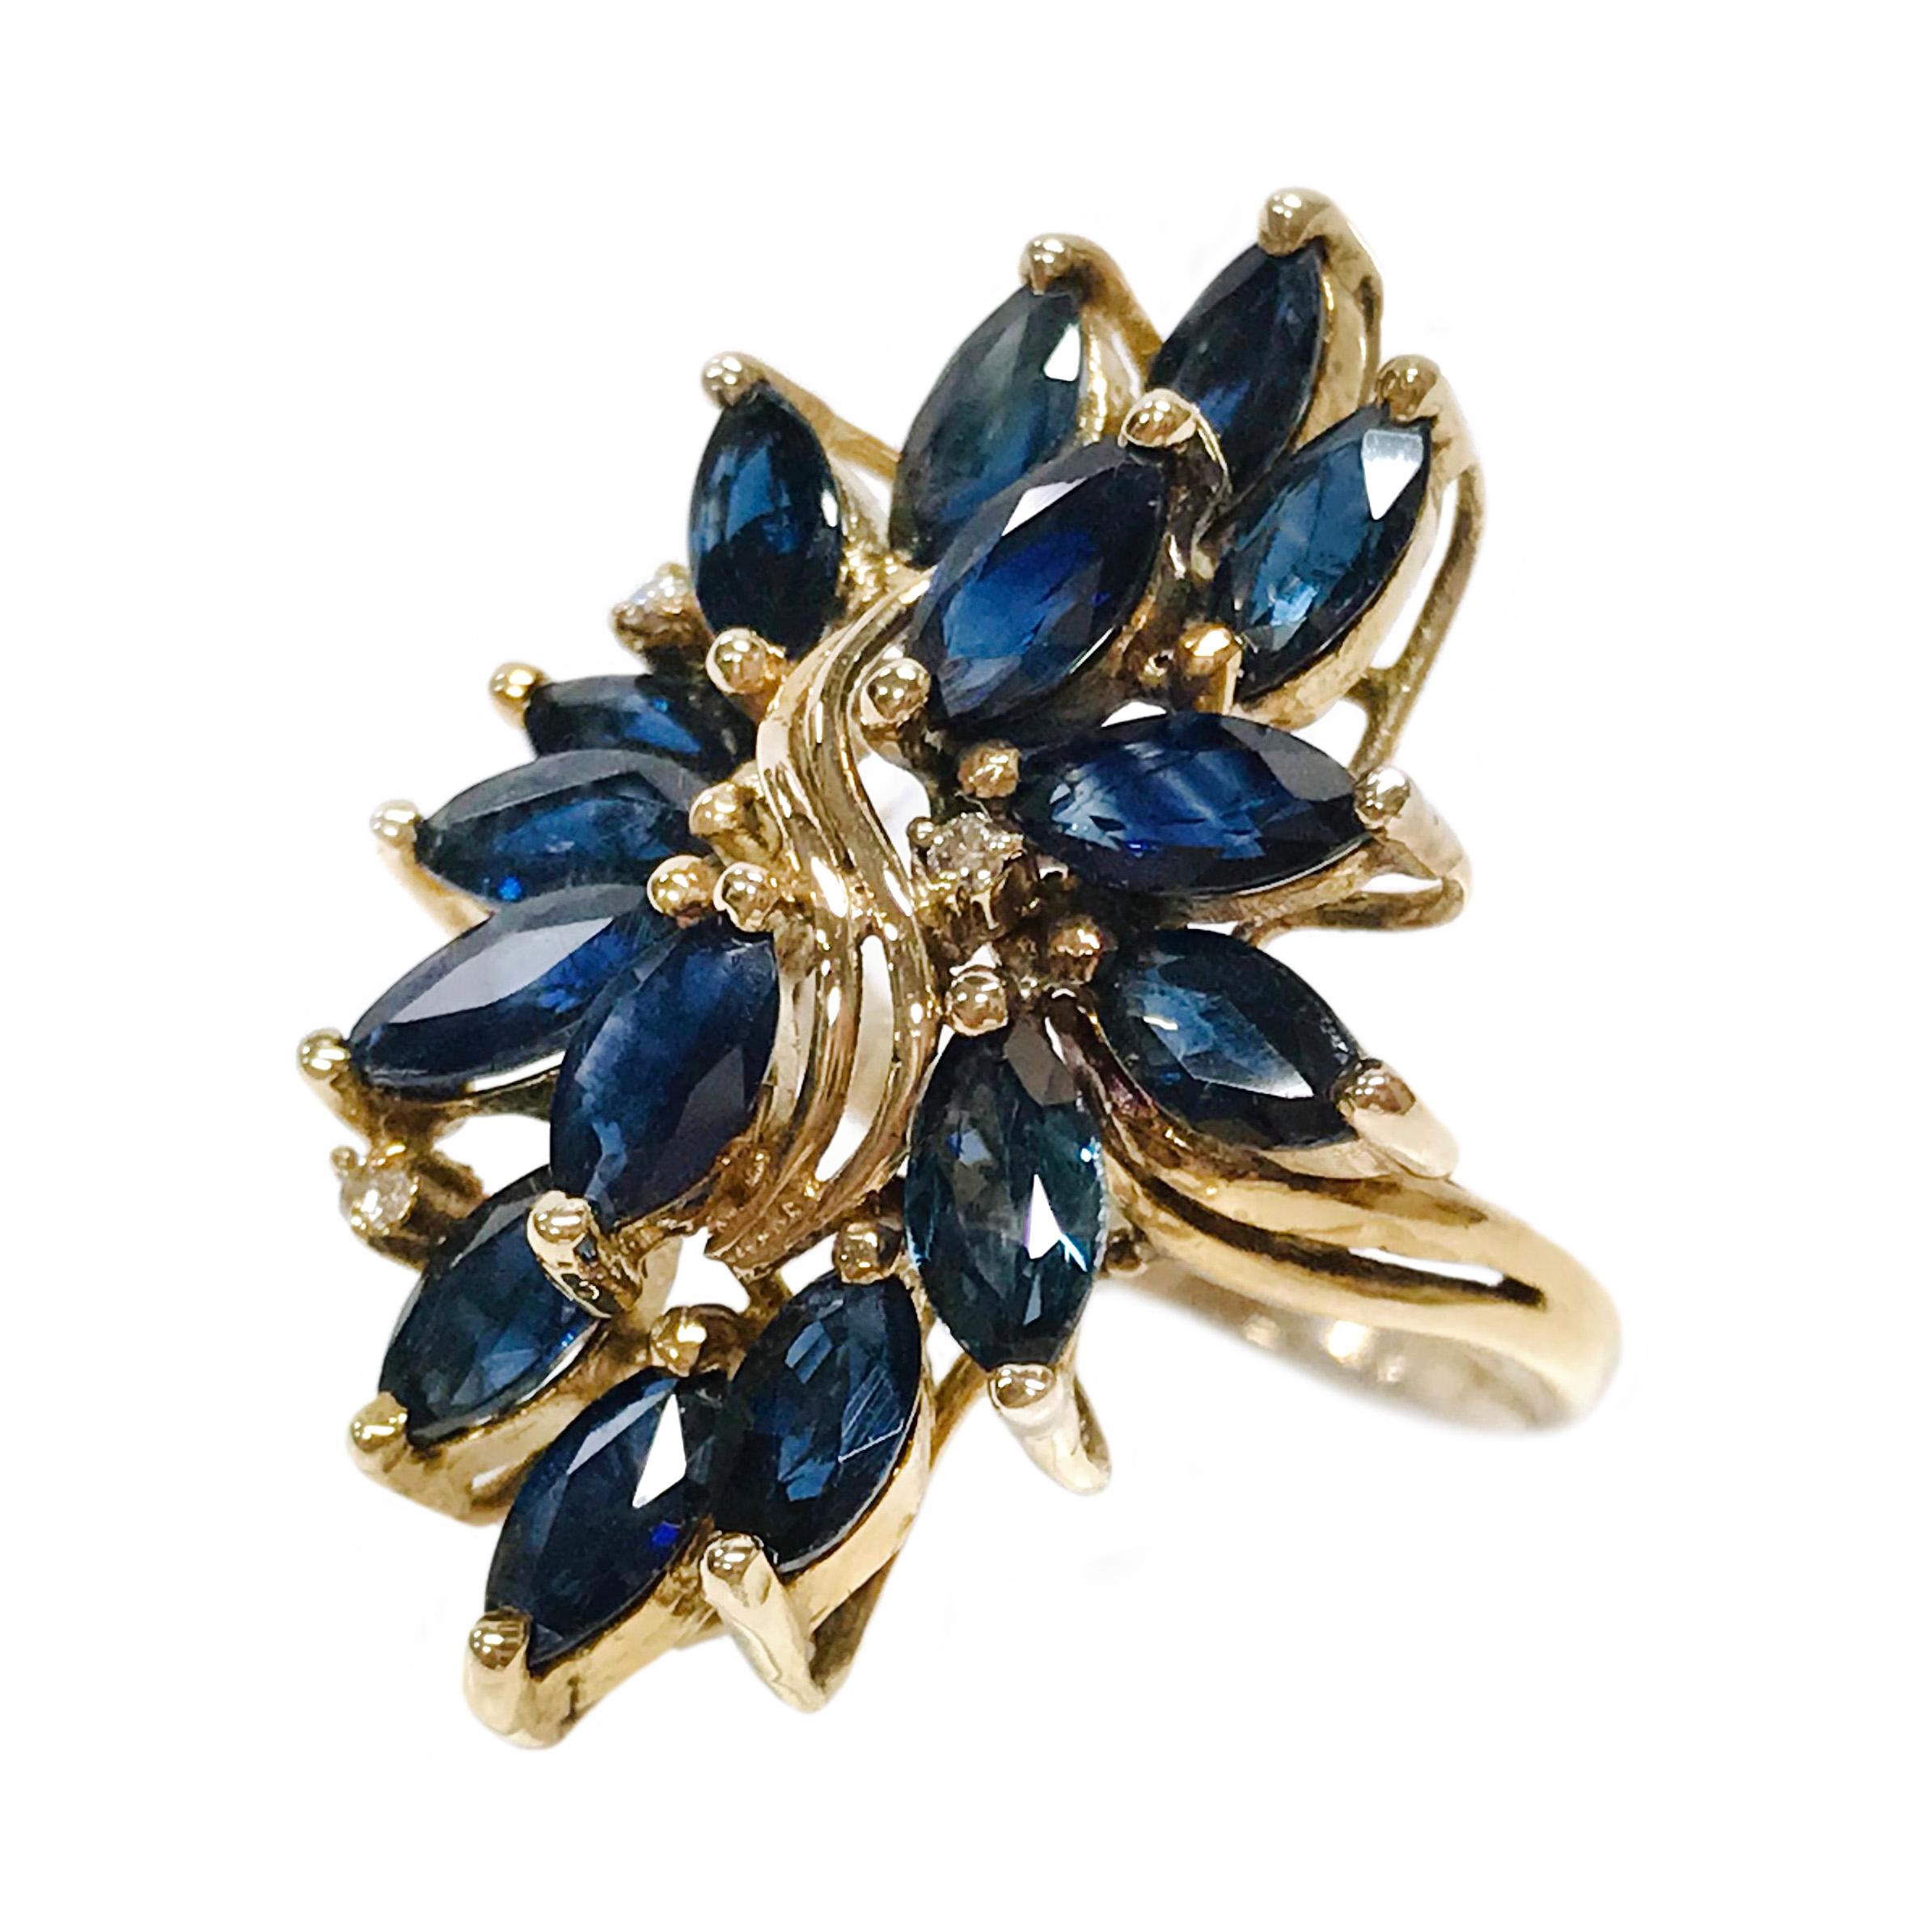 14 Karat Marquise-Cut Blue Sapphire Diamond Cluster Ring. The twisted split band cluster ring features fifteen marquise-cut dark blue sapphires and three round diamonds. All stones are prong-set. Stamped on the inside of the band is 14K 585. The